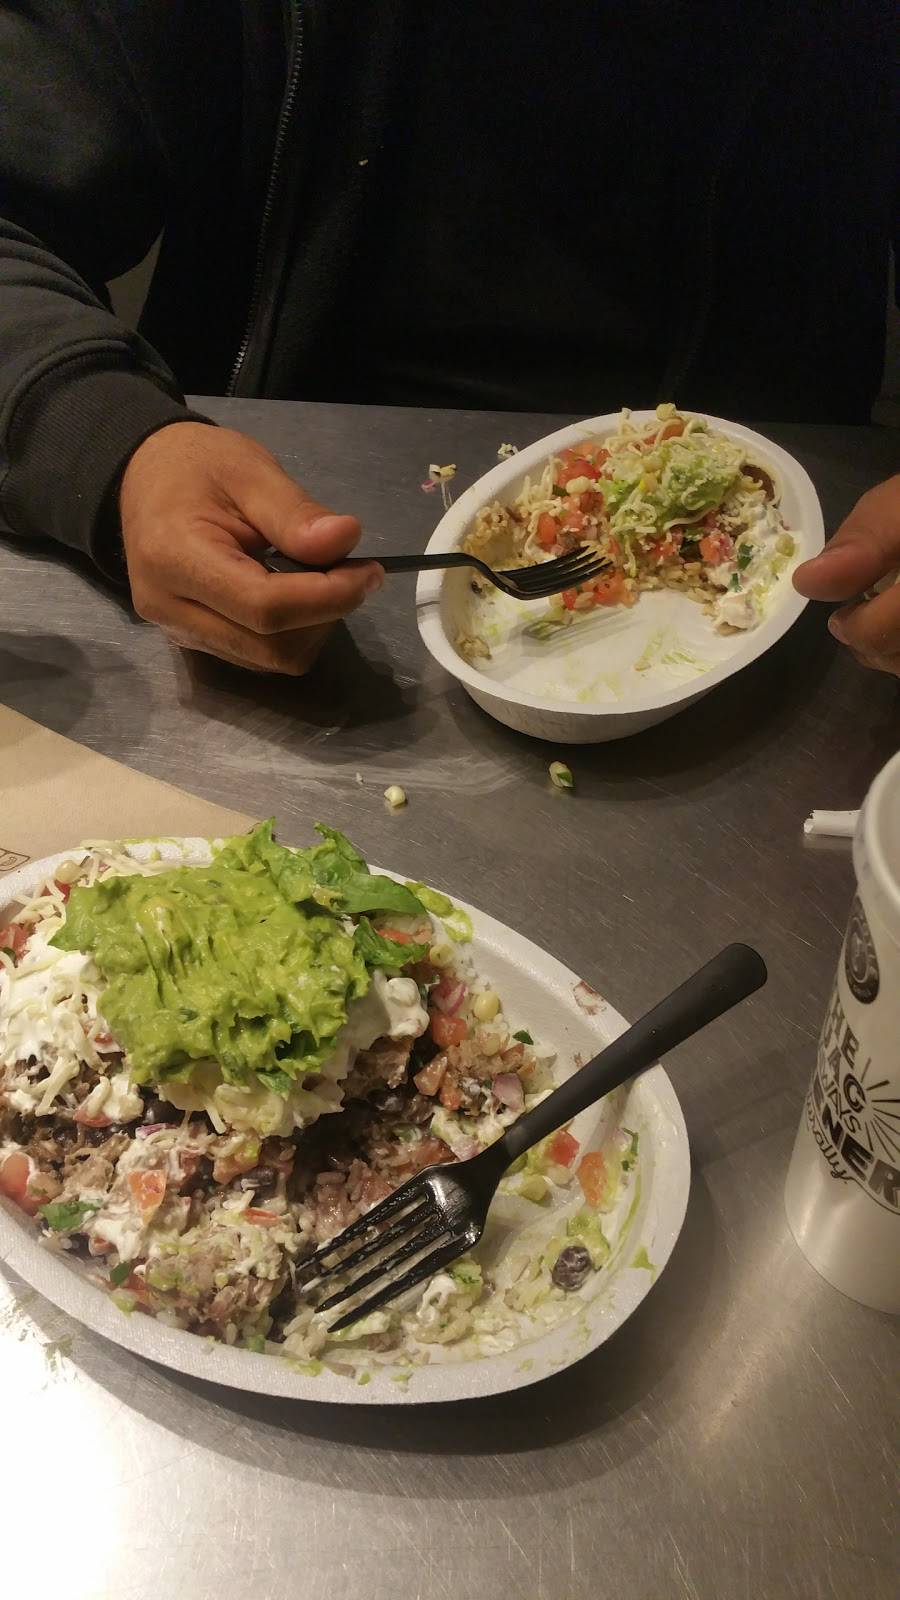 Chipotle Mexican Grill | restaurant | 394 Myrtle Ave, Brooklyn, NY 11205, USA | 7188553517 OR +1 718-855-3517